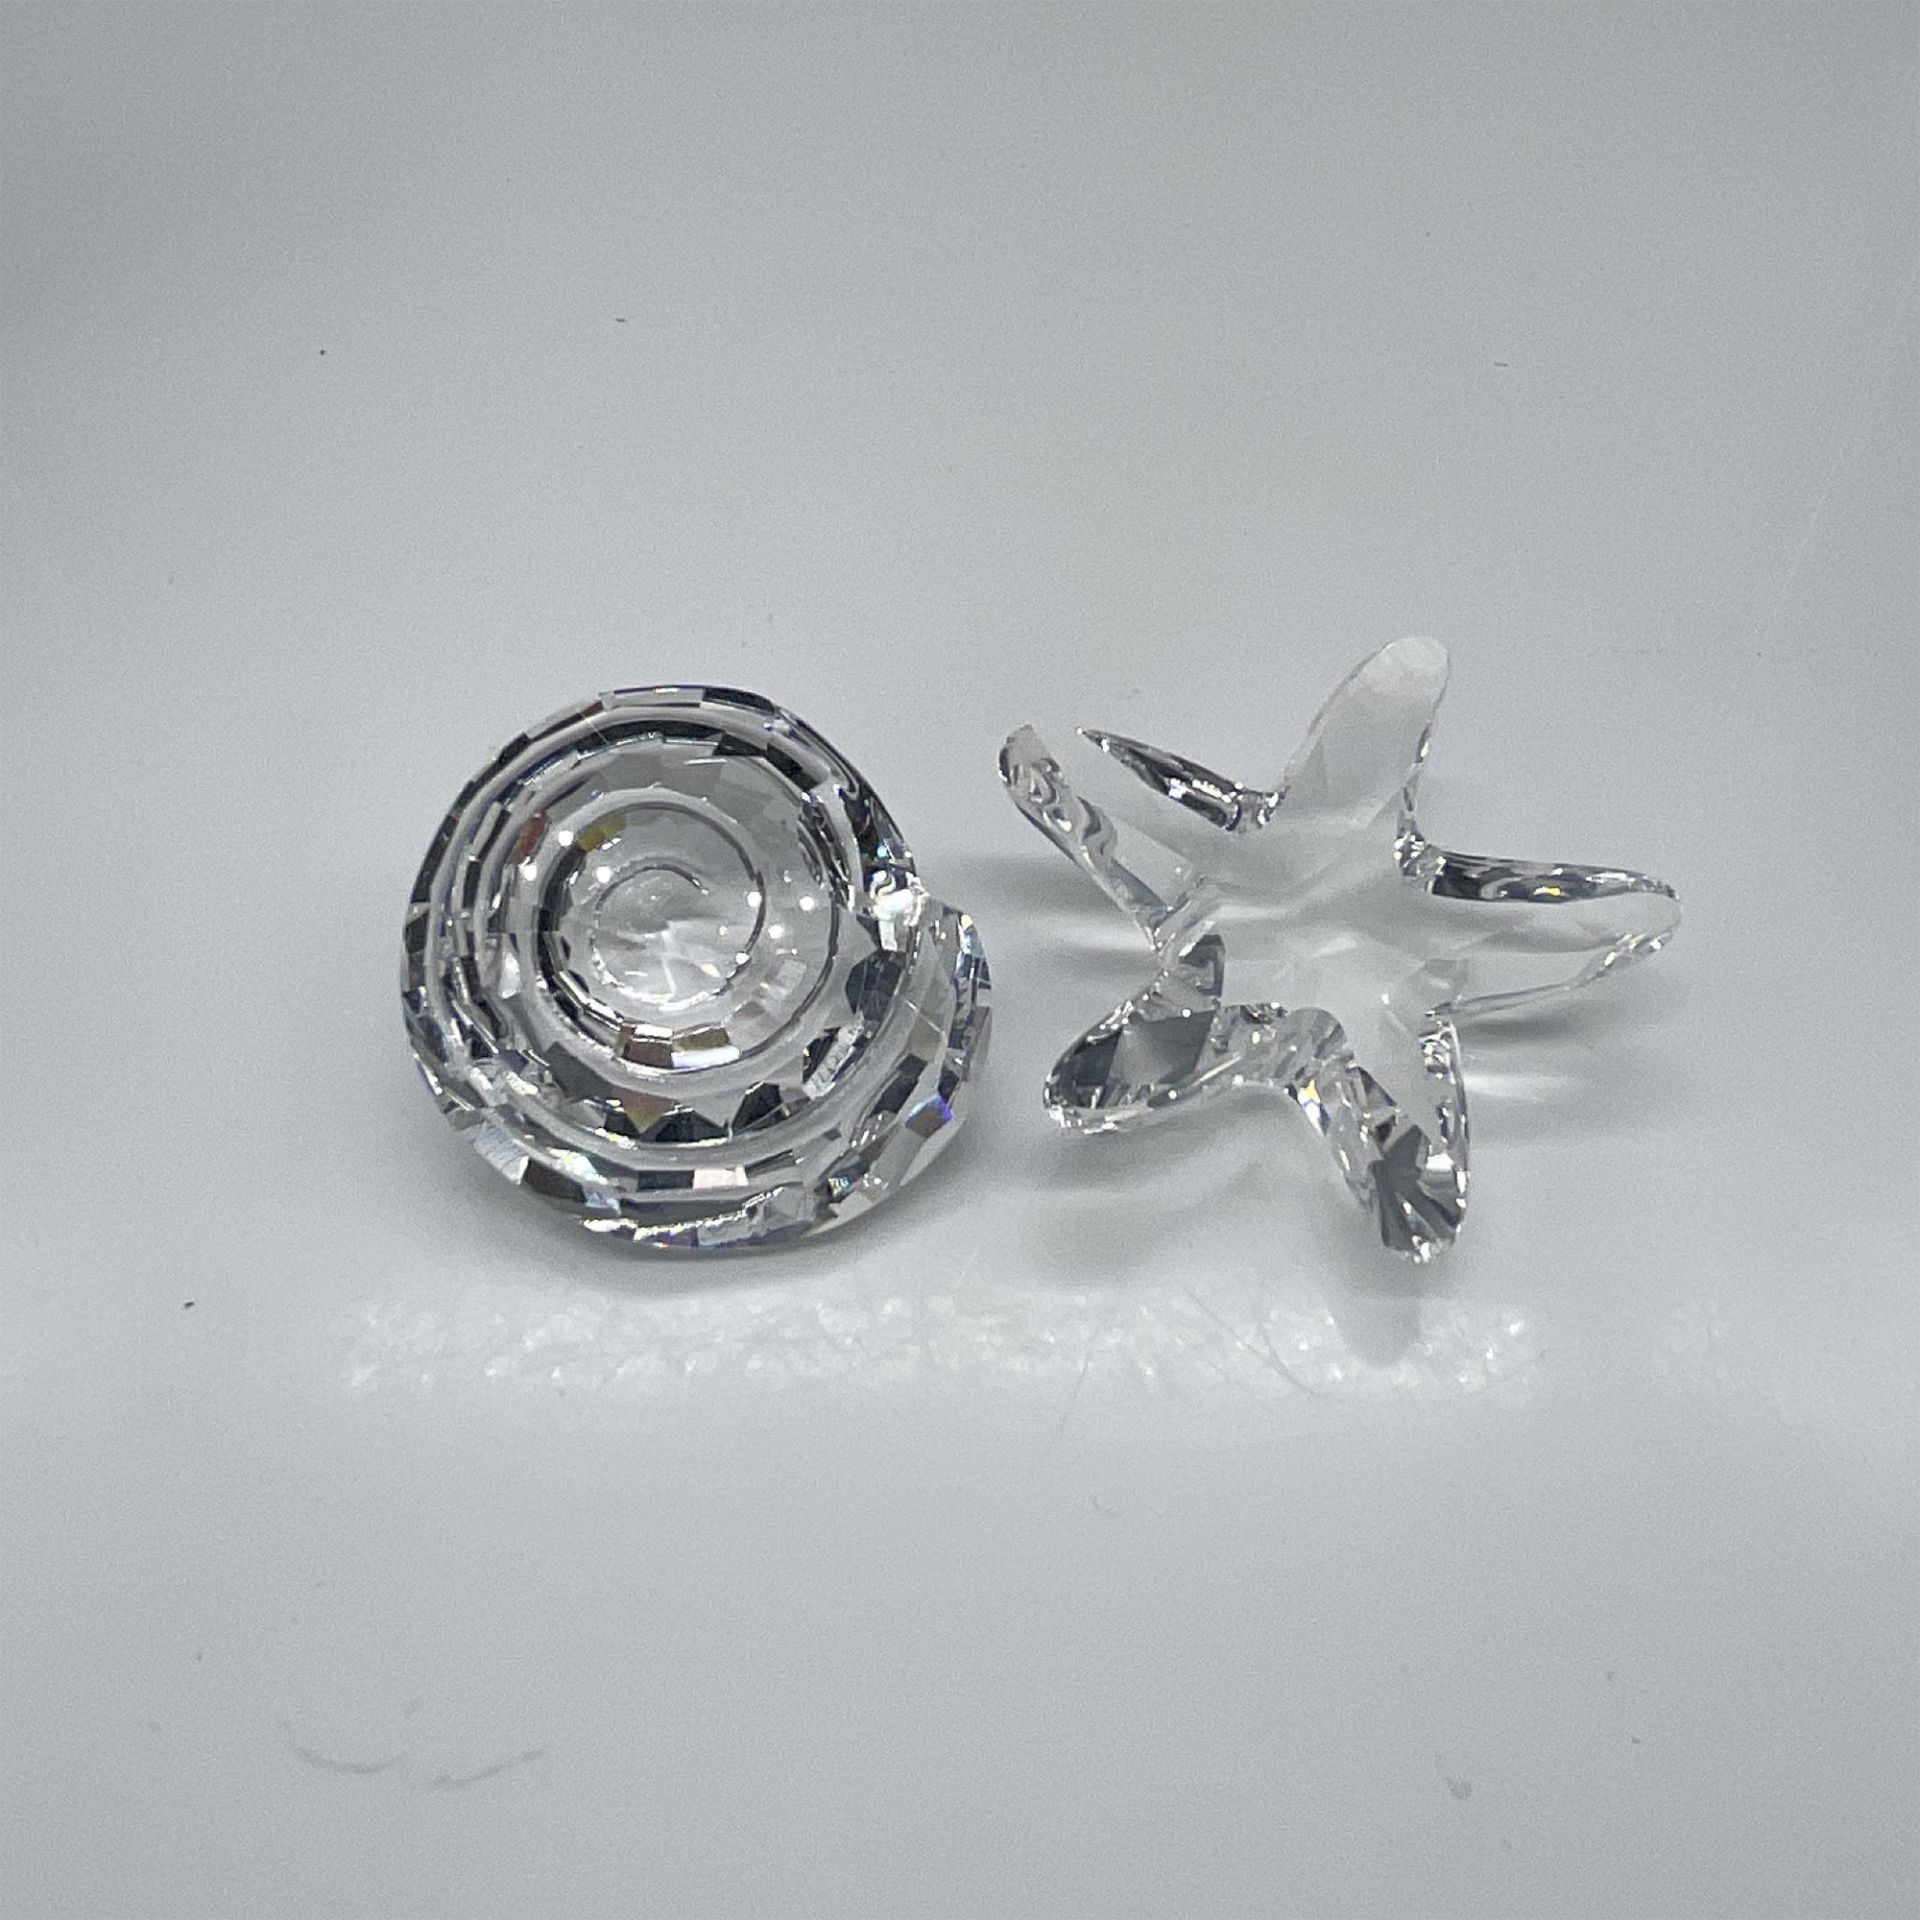 2pc Swarovski Crystal Paperweights, Starfish and Top Shell - Image 2 of 3